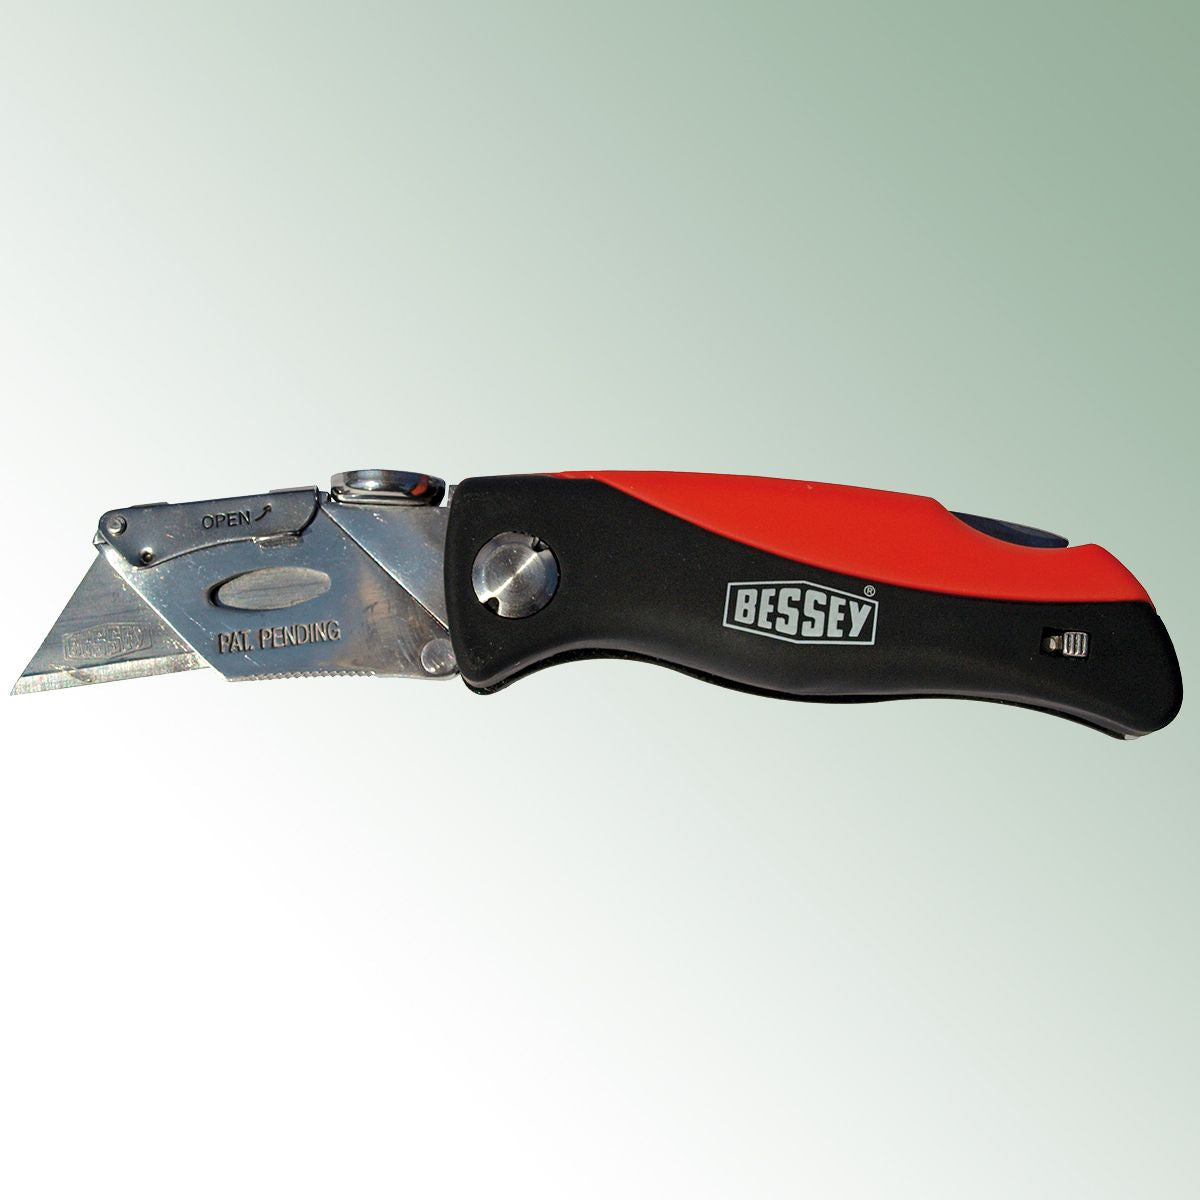 Bessey-Folding-Cutter 16cm with 5 Spare Blades FOLDABLE